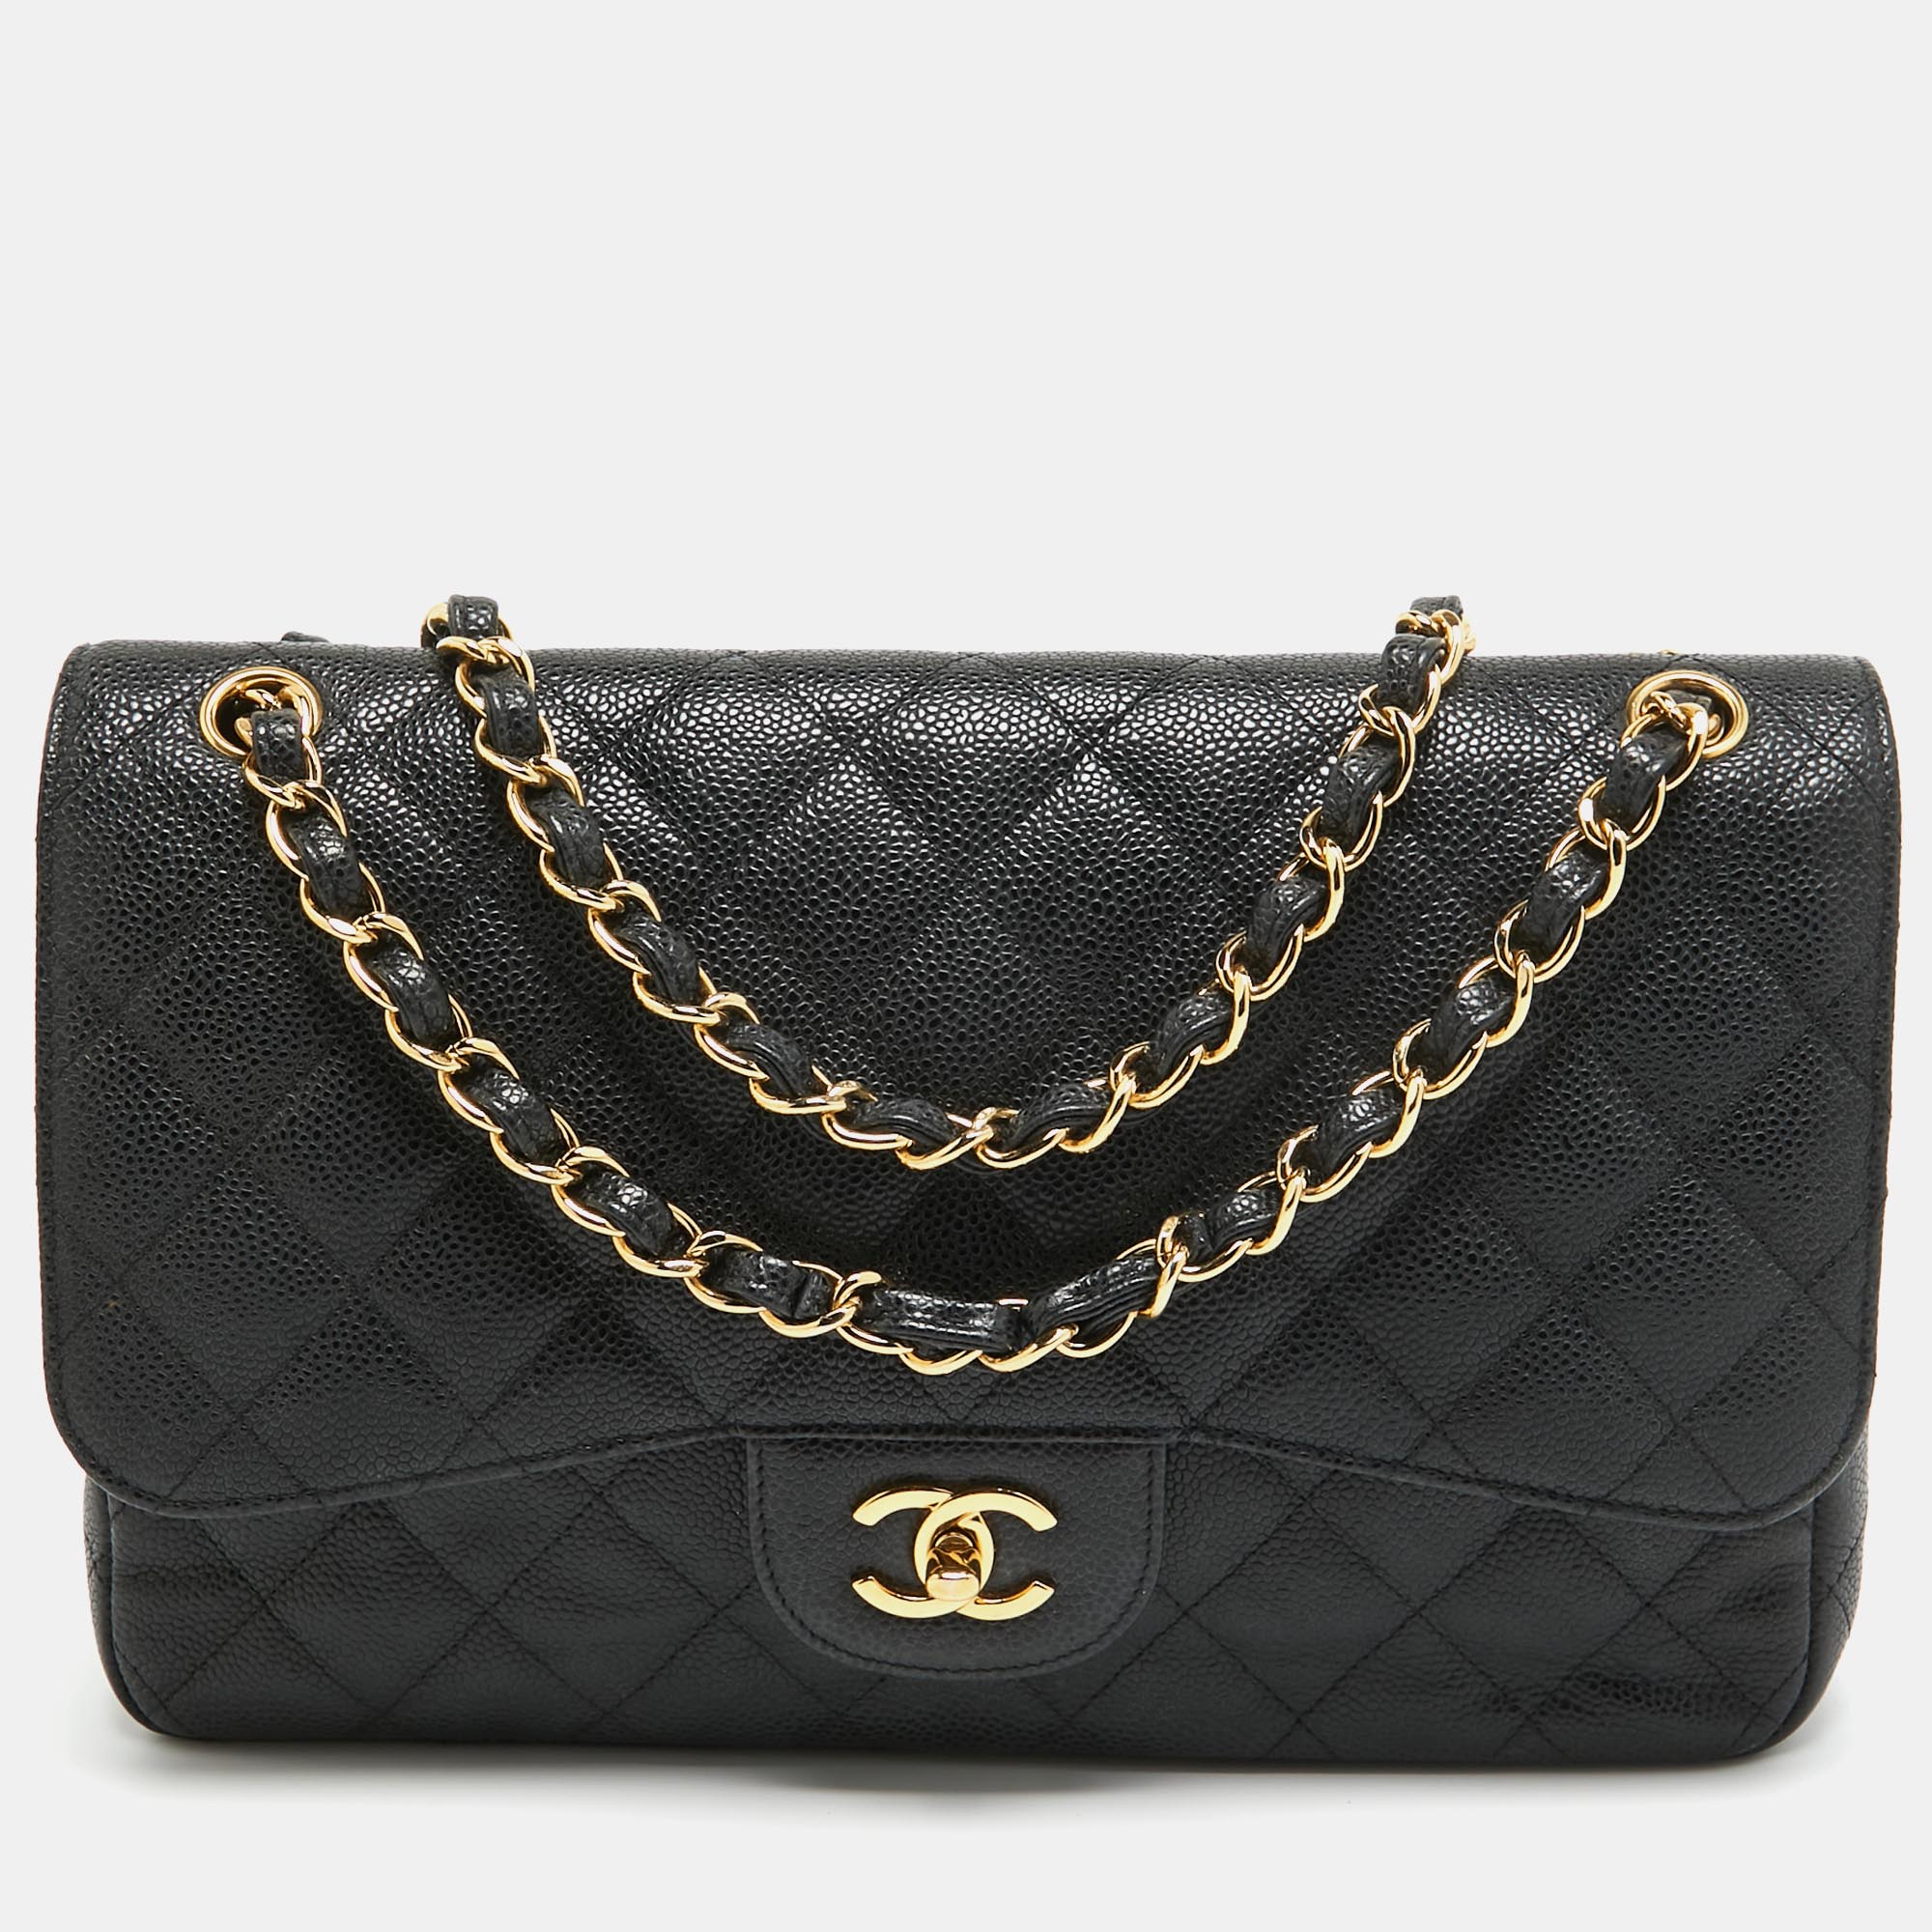 Chanel black quilted caviar leather jumbo classic double flap bag